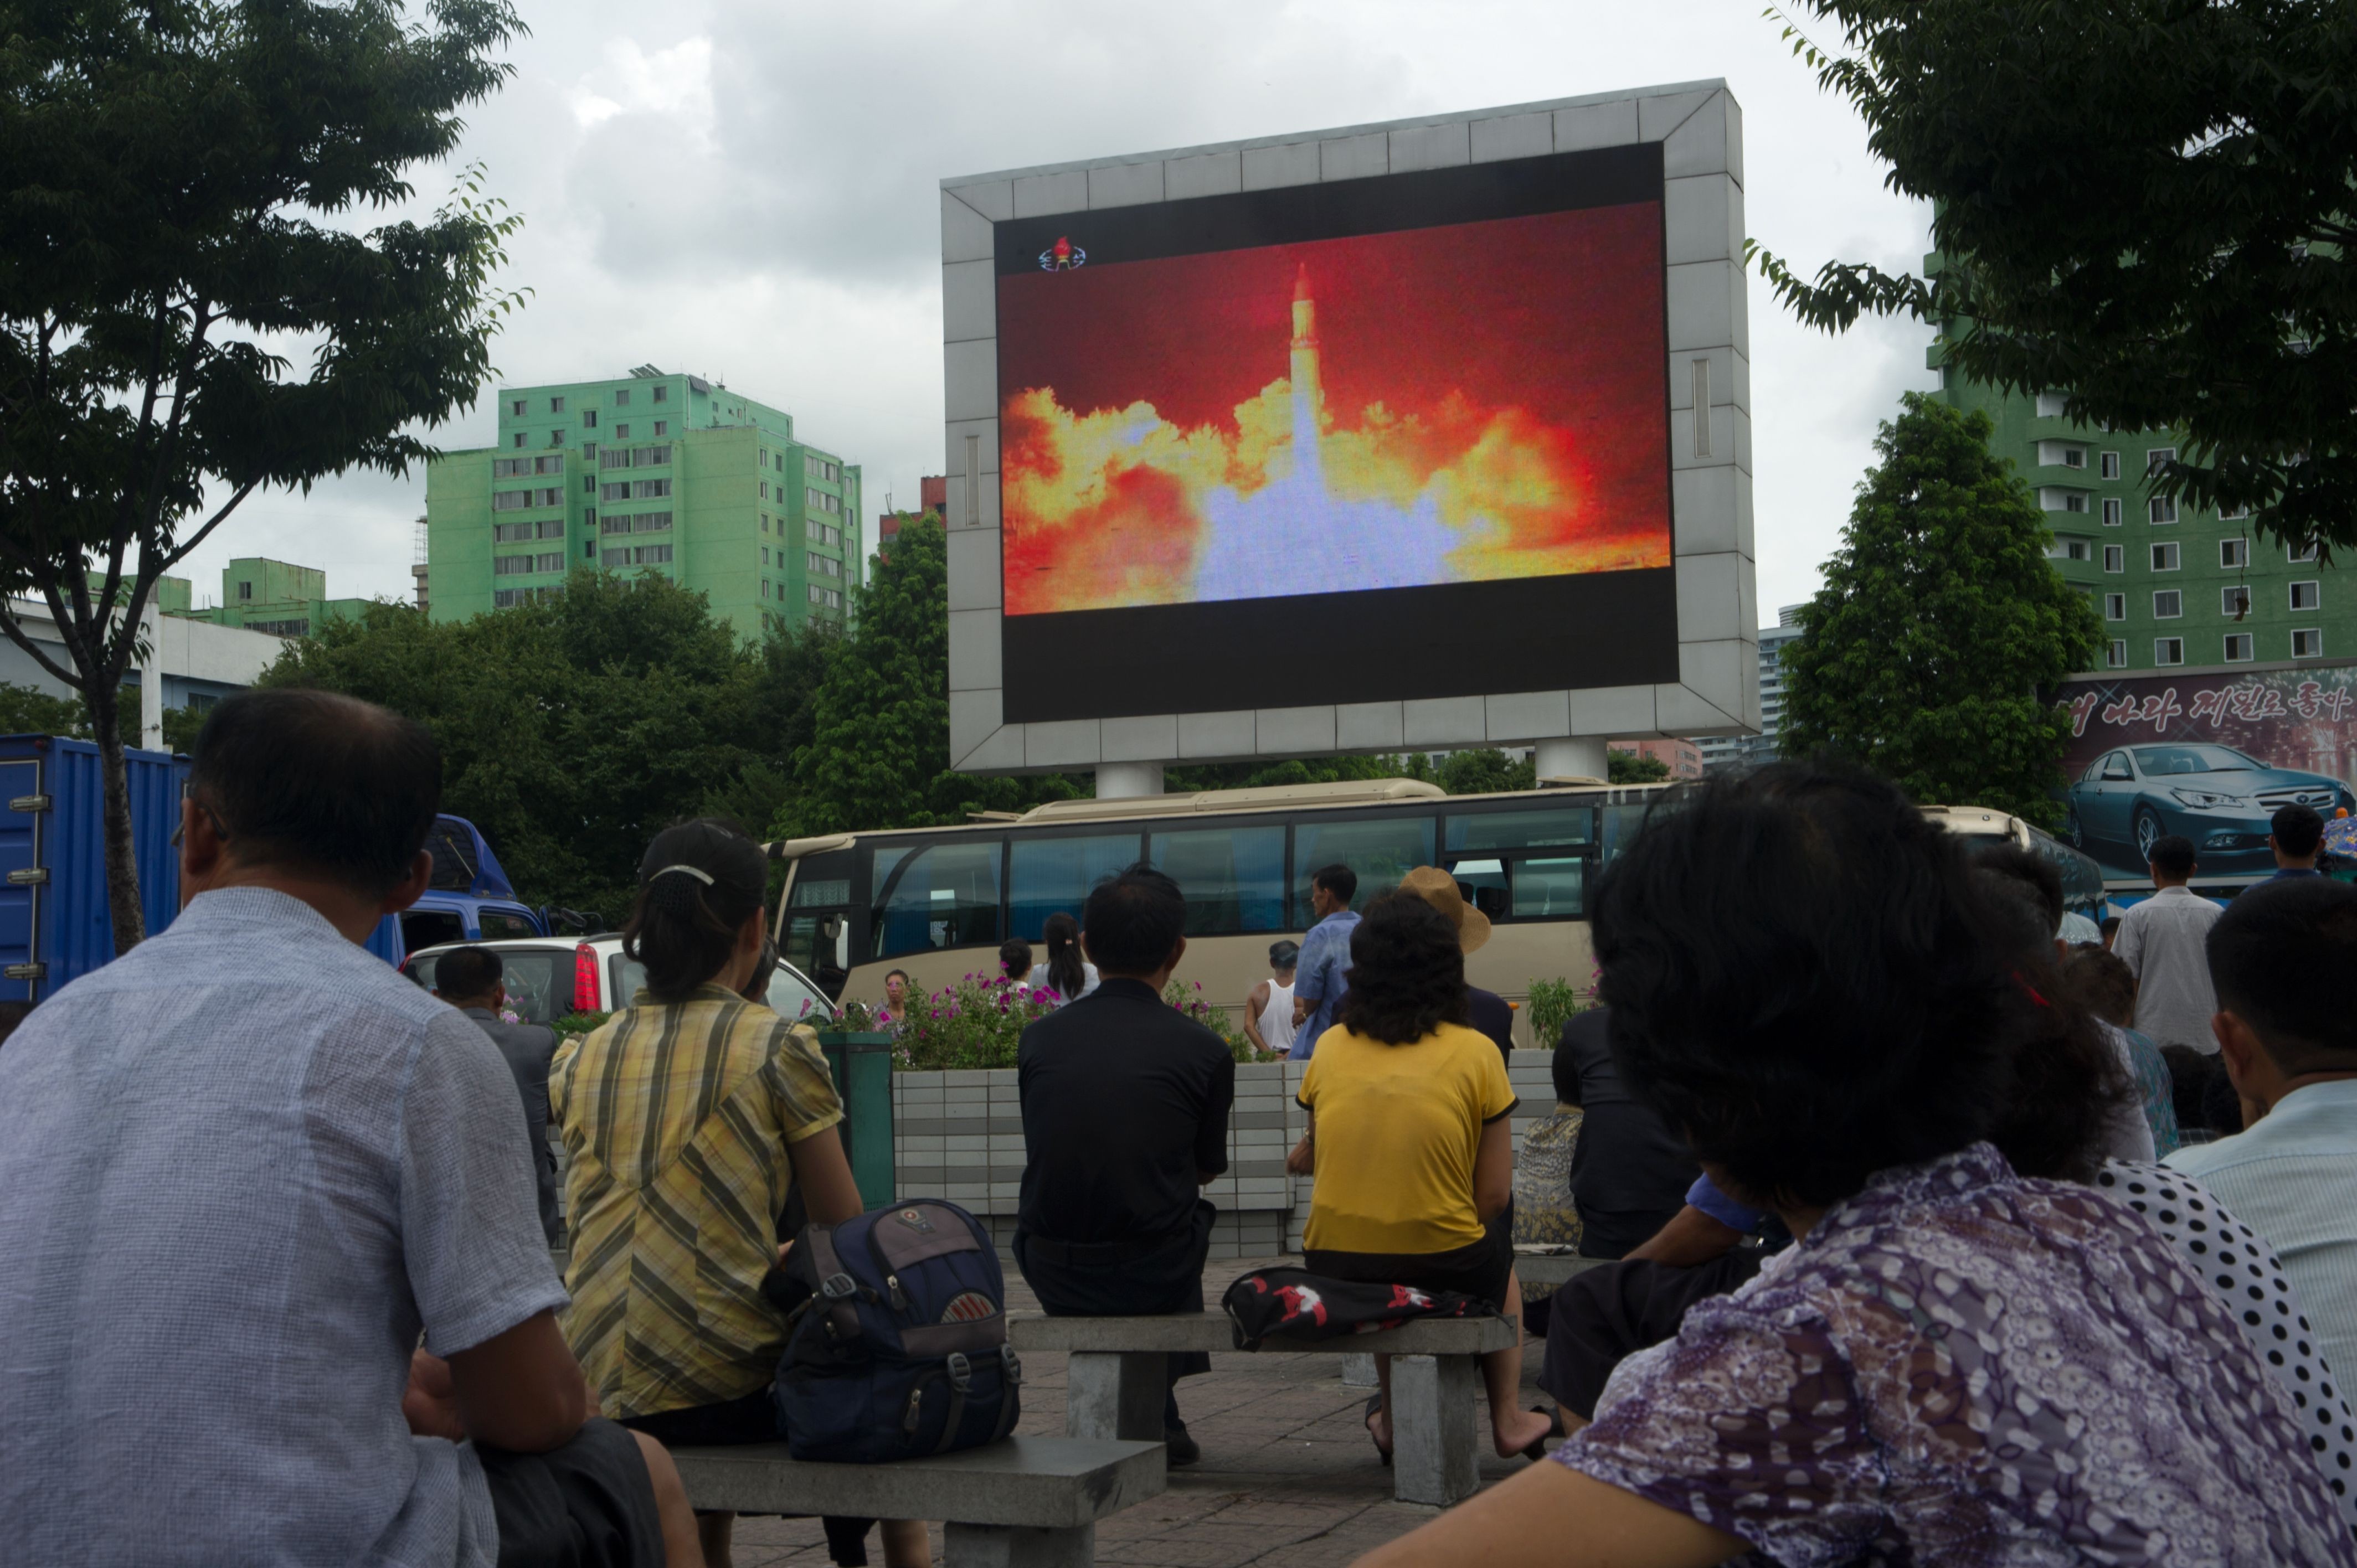 People watch as coverage of a North Korean intercontinental ballistic missile test is displayed on a screen in a public square in Pyongyang, on July 29. Photo: AFP